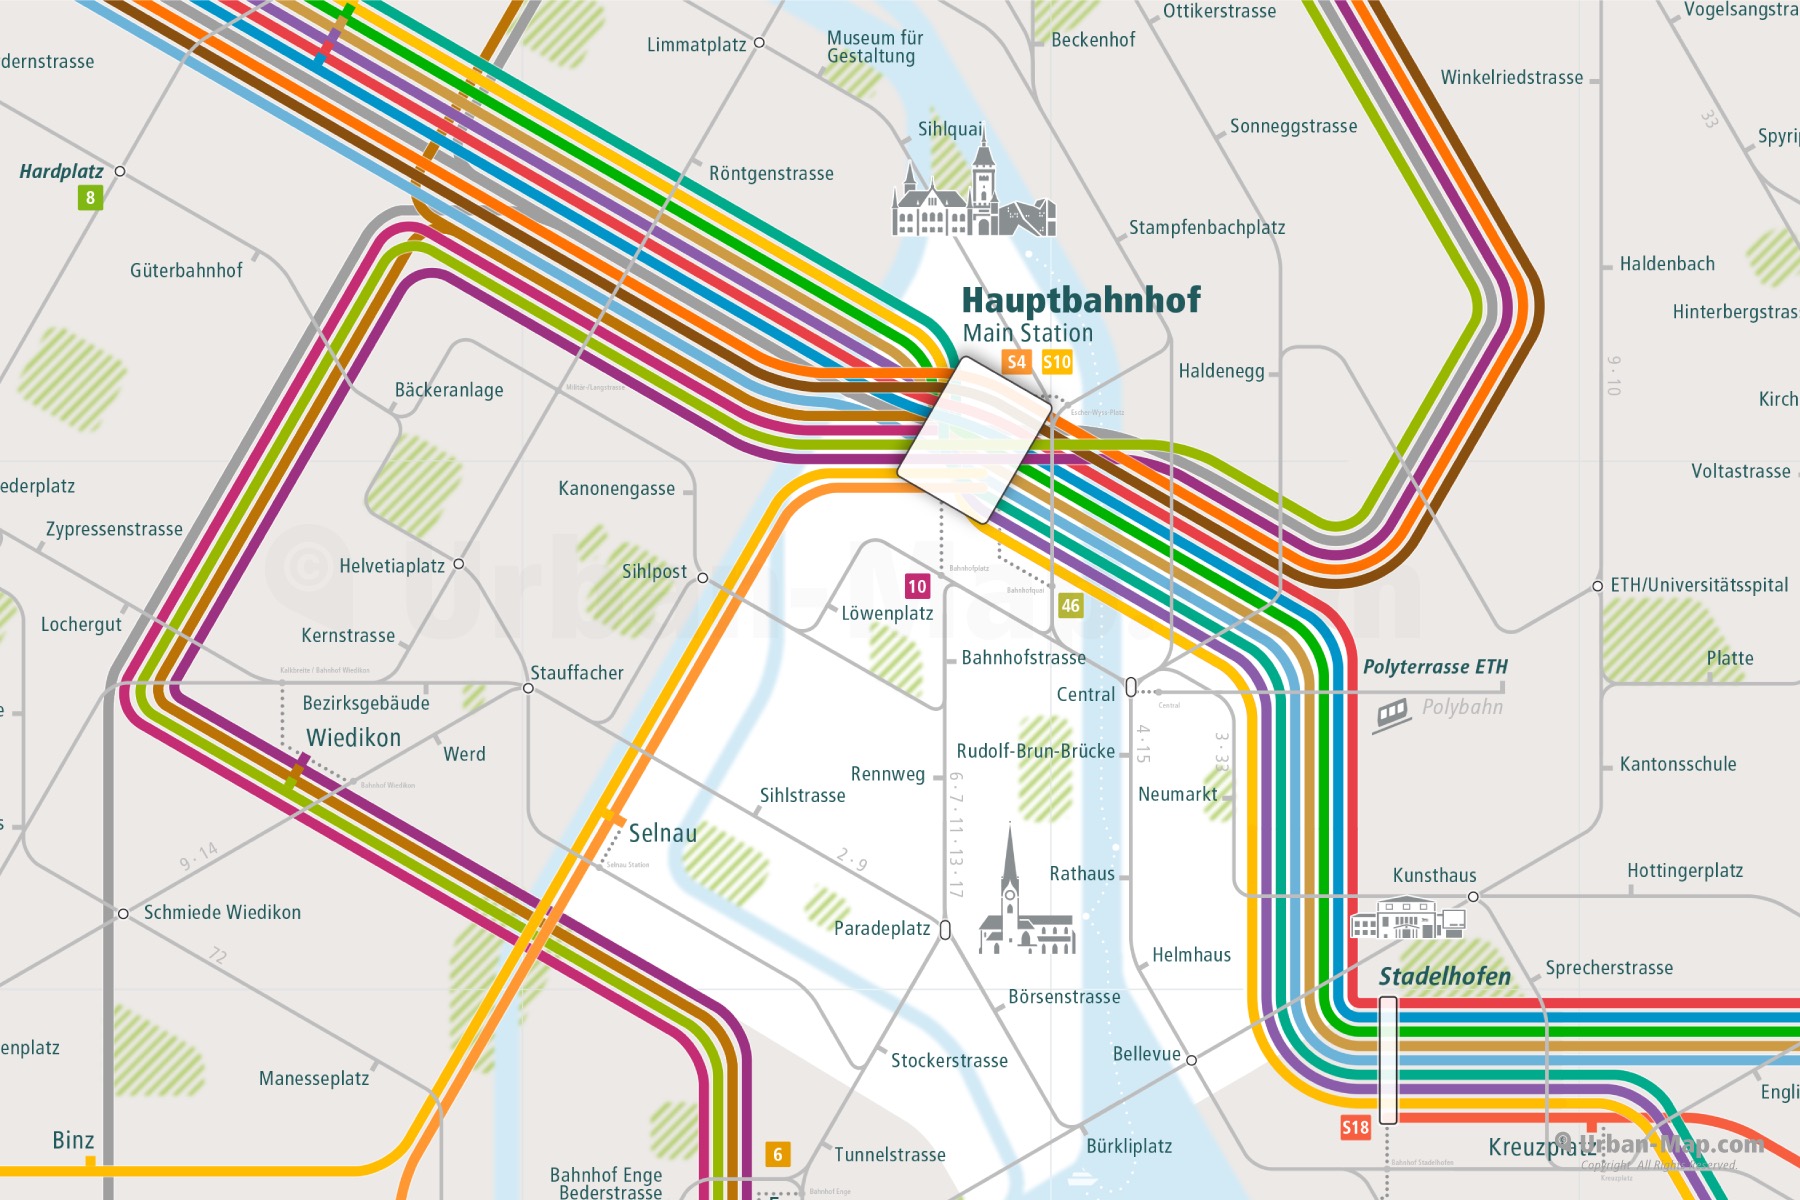 Zurich City Rail Map shows the train and public transportation routes of tram, S-Bahn, commuter train - Close-Up